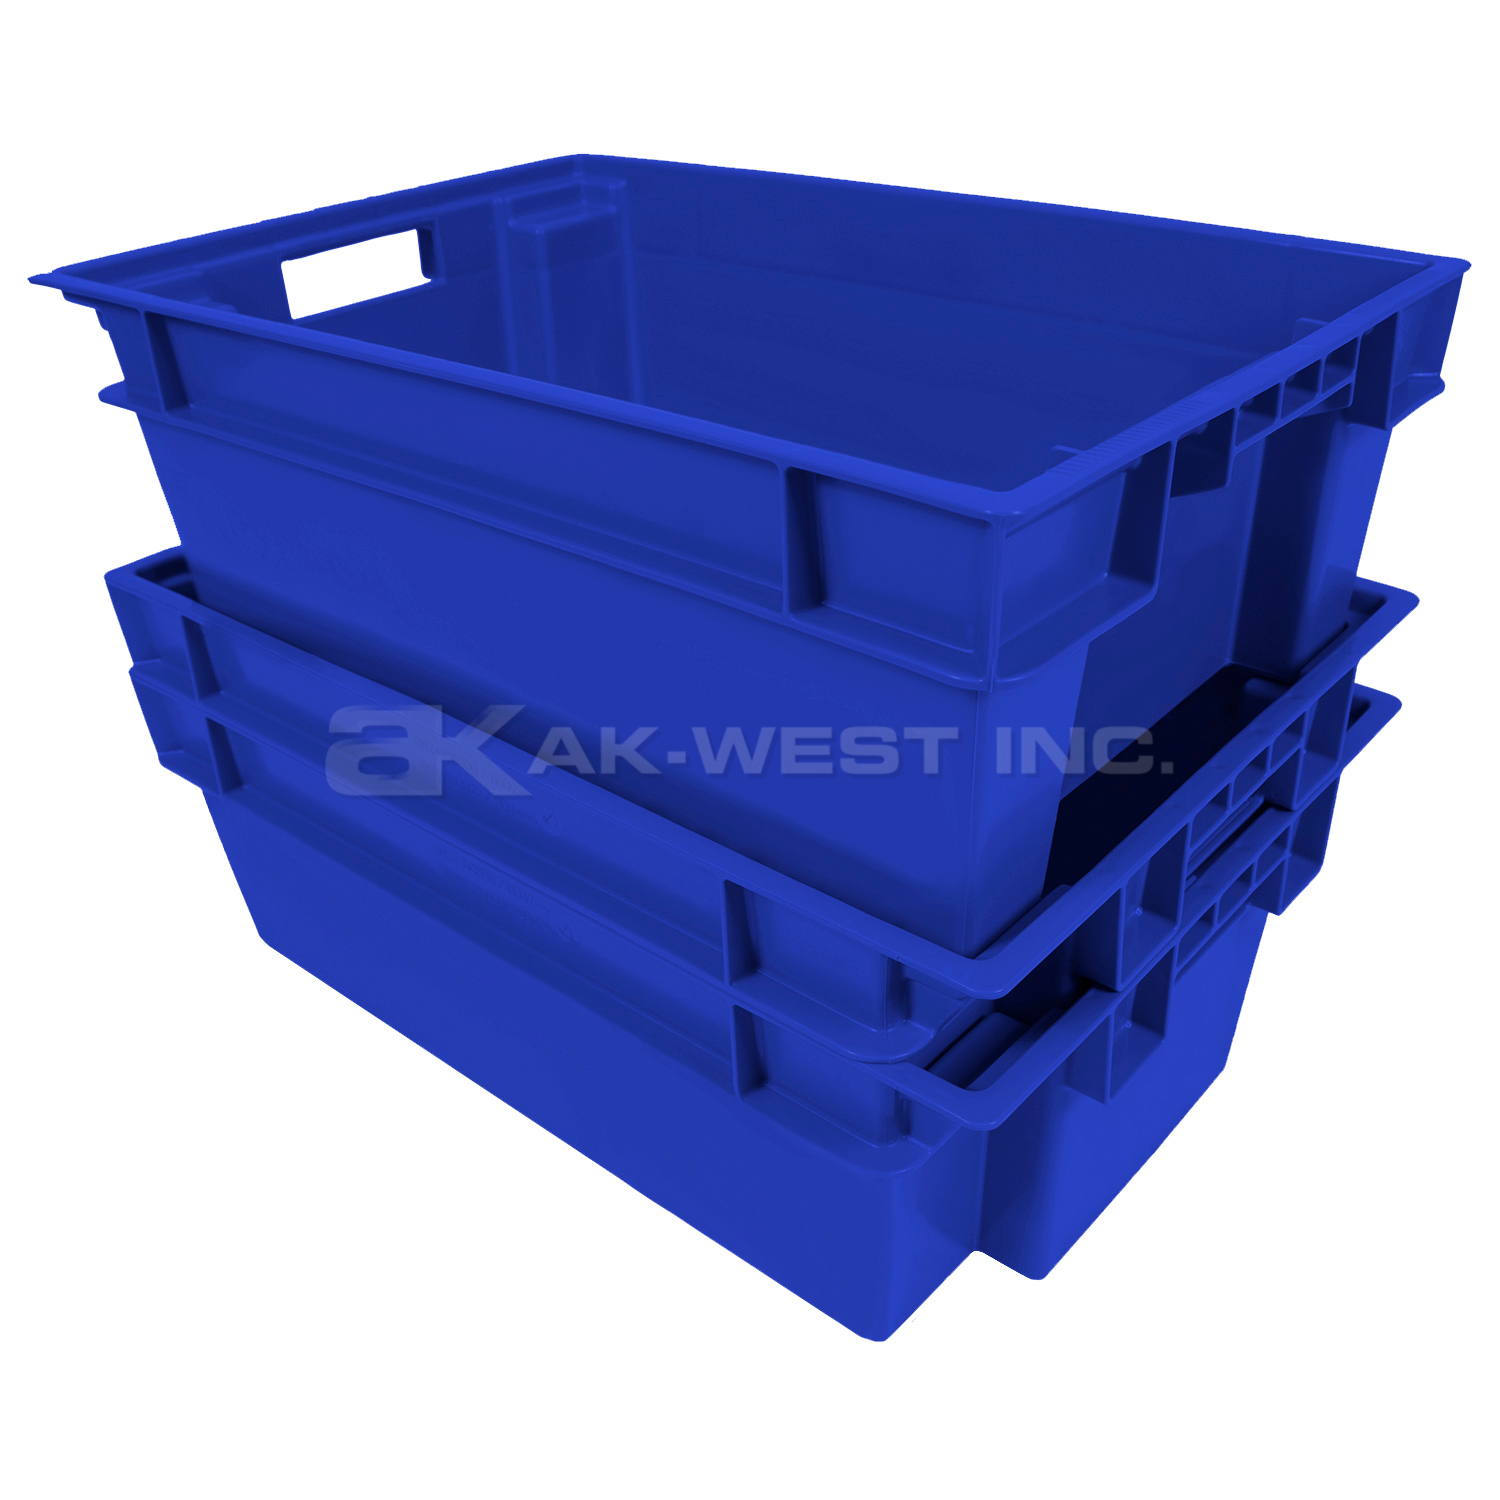 Blue, 24" x 16" x 8", Solid Stack and Nest Container, (Alt. M/N: AC11032)